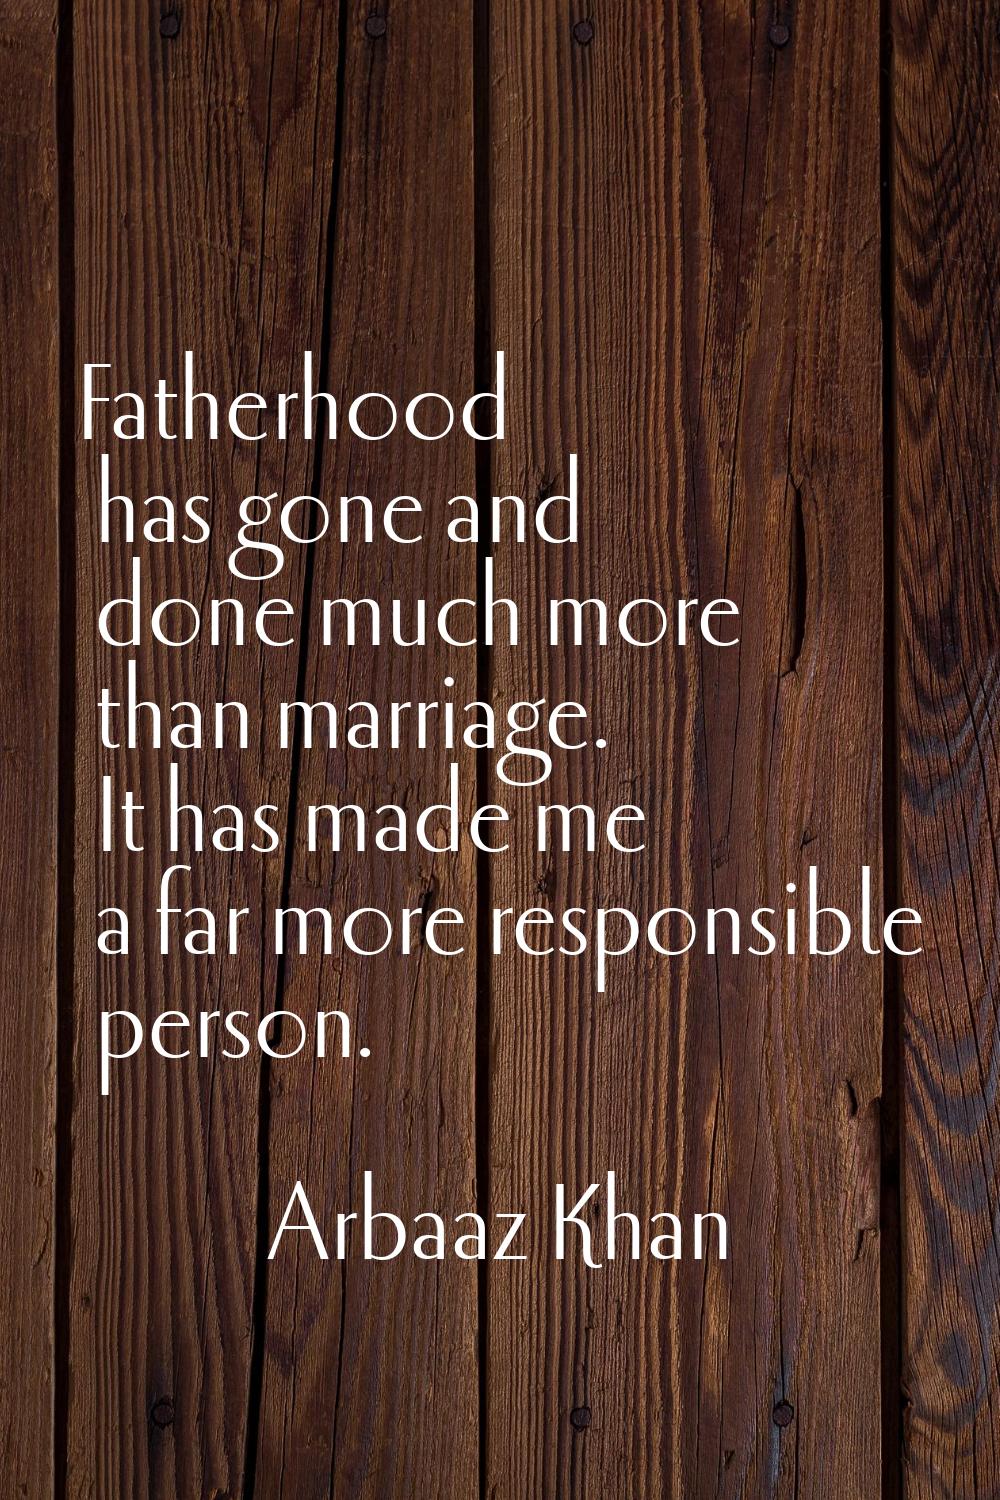 Fatherhood has gone and done much more than marriage. It has made me a far more responsible person.